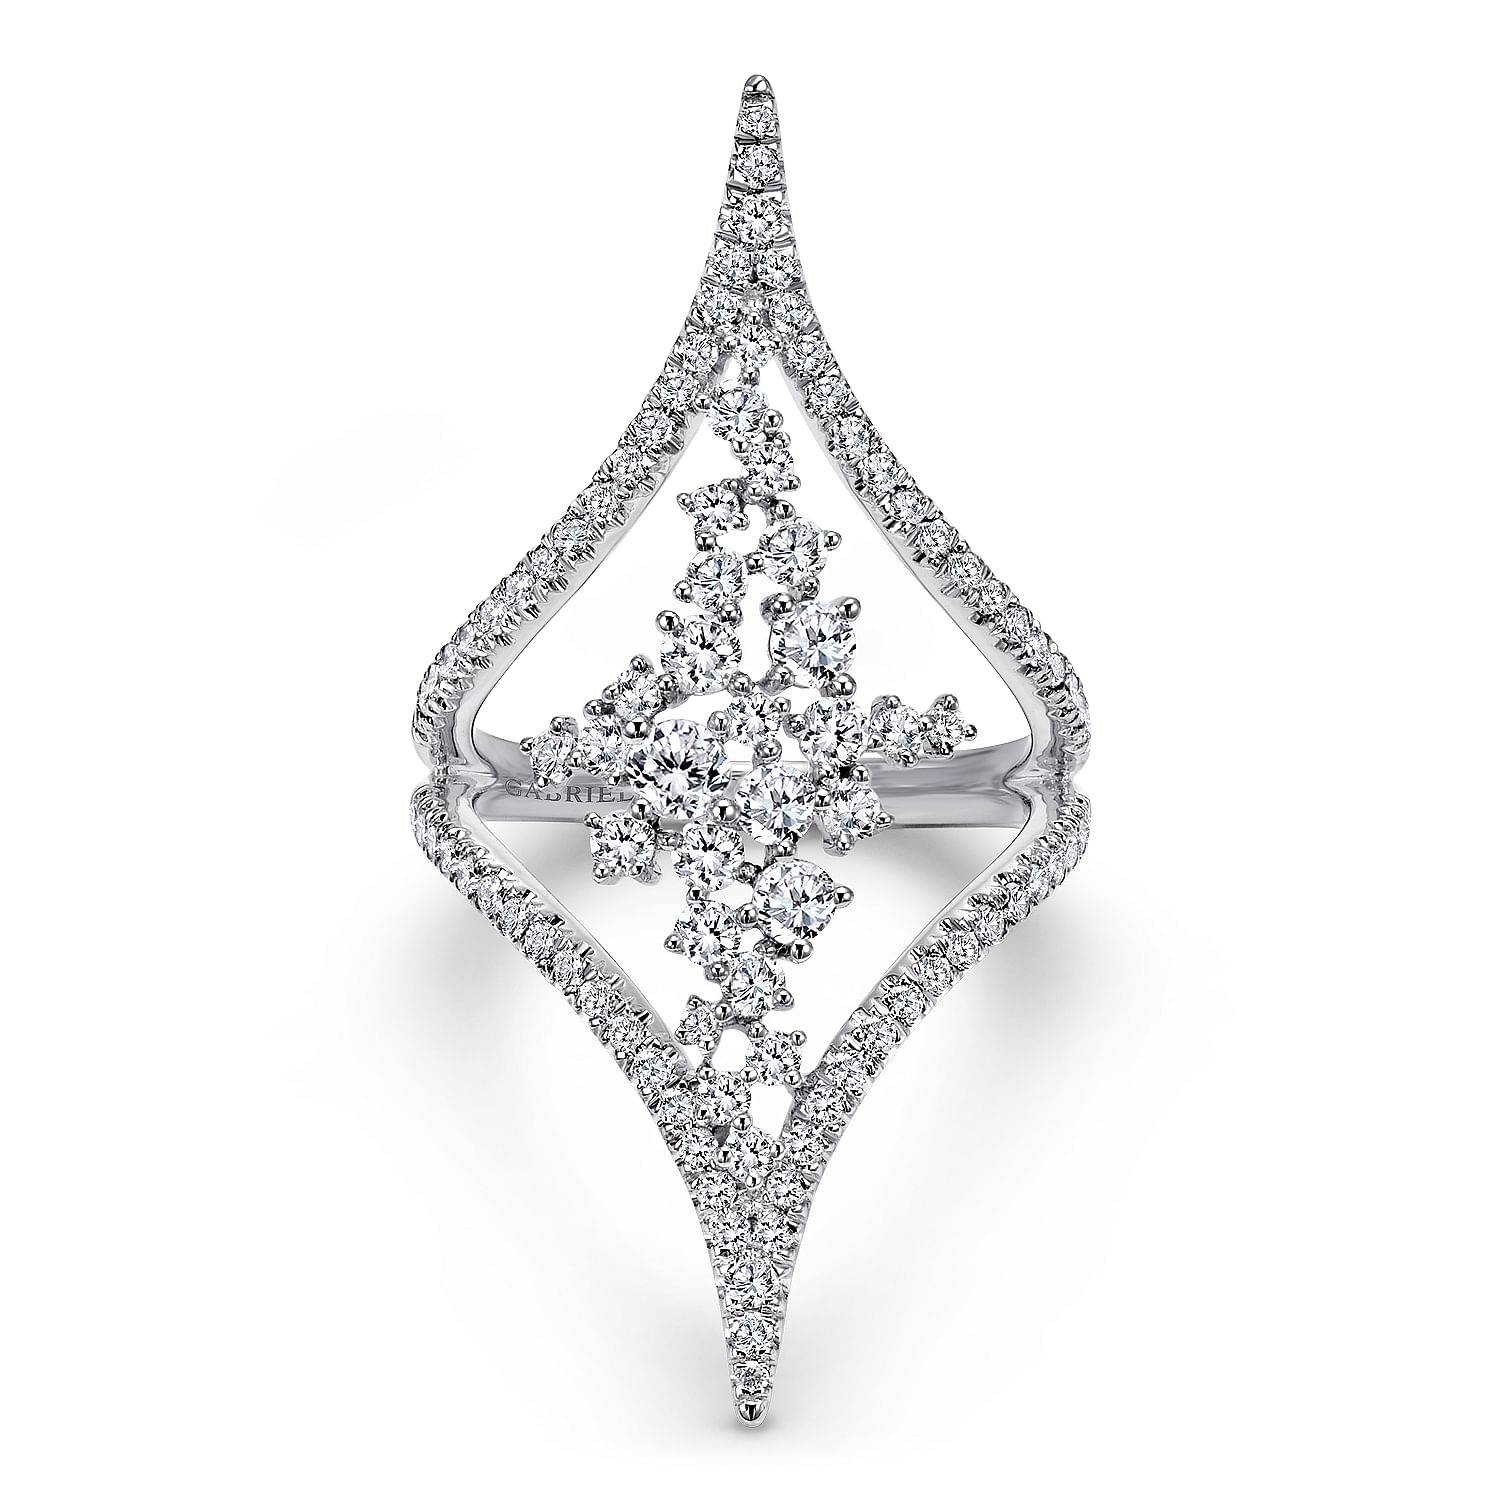 18K White Gold Pointed Ends Ring with Diamond Cluster Center